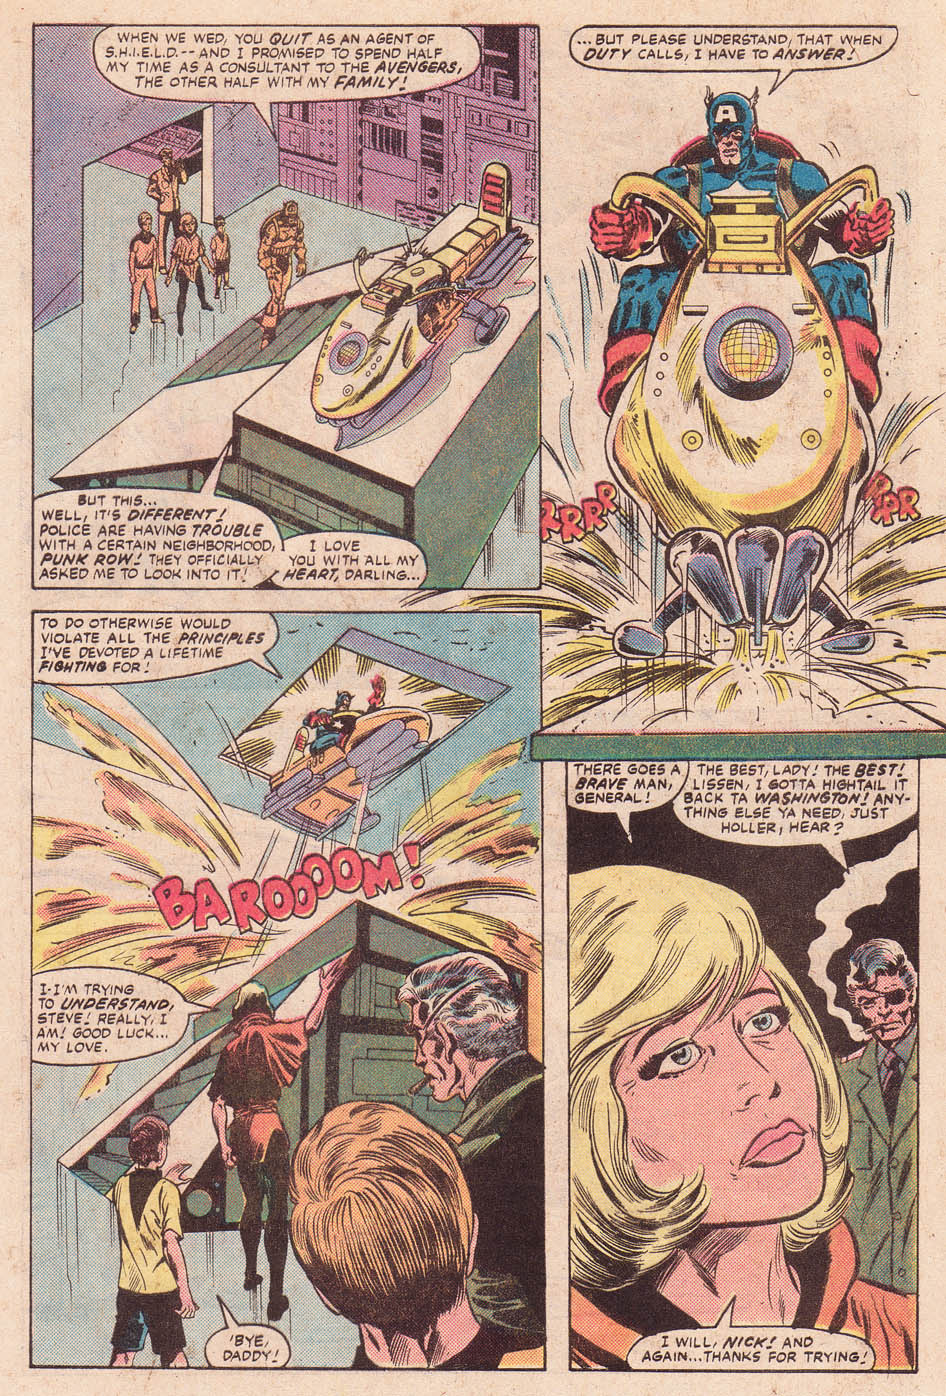 What If? (1977) issue 38 - Daredevil and Captain America - Page 17